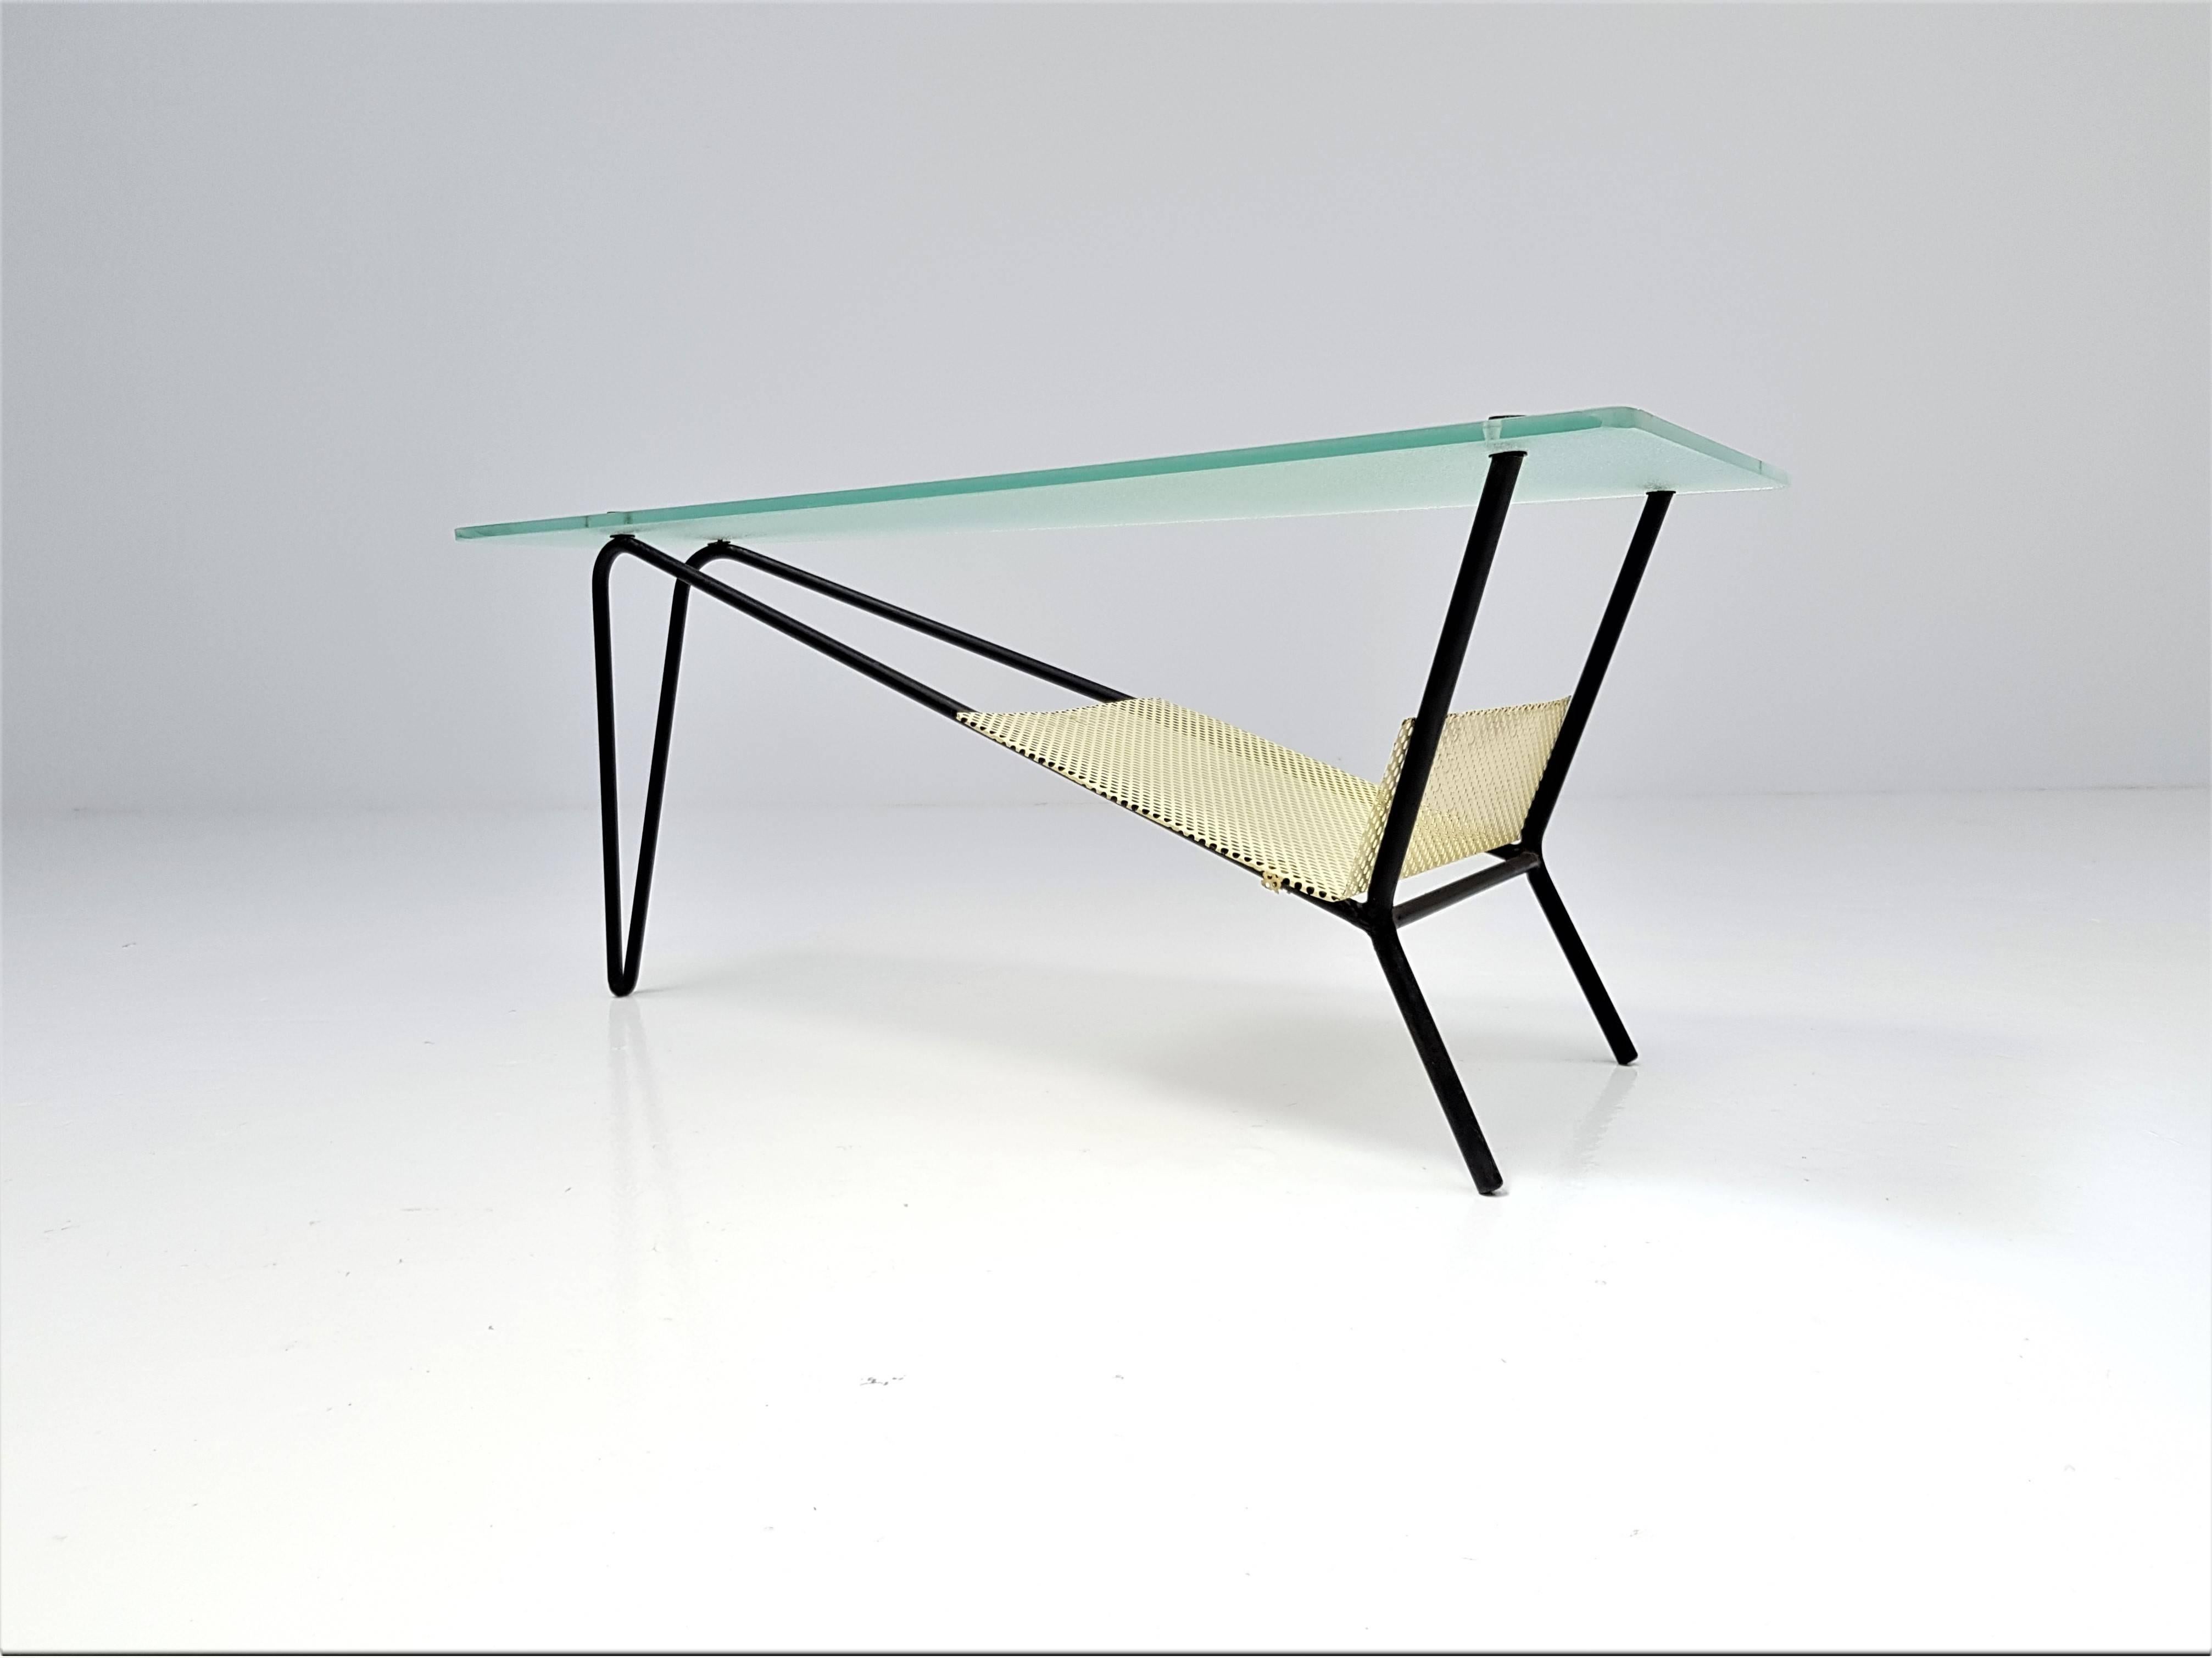 An end table by Robert Mathieu, France, circa 1955

An end table by Robert Mathieu, circa 1955. Consisting of a lacquered black tubular structure, a sandblasted glass top, brass fixings and a perforated tray. 

Robert Mathieu is recognised as an